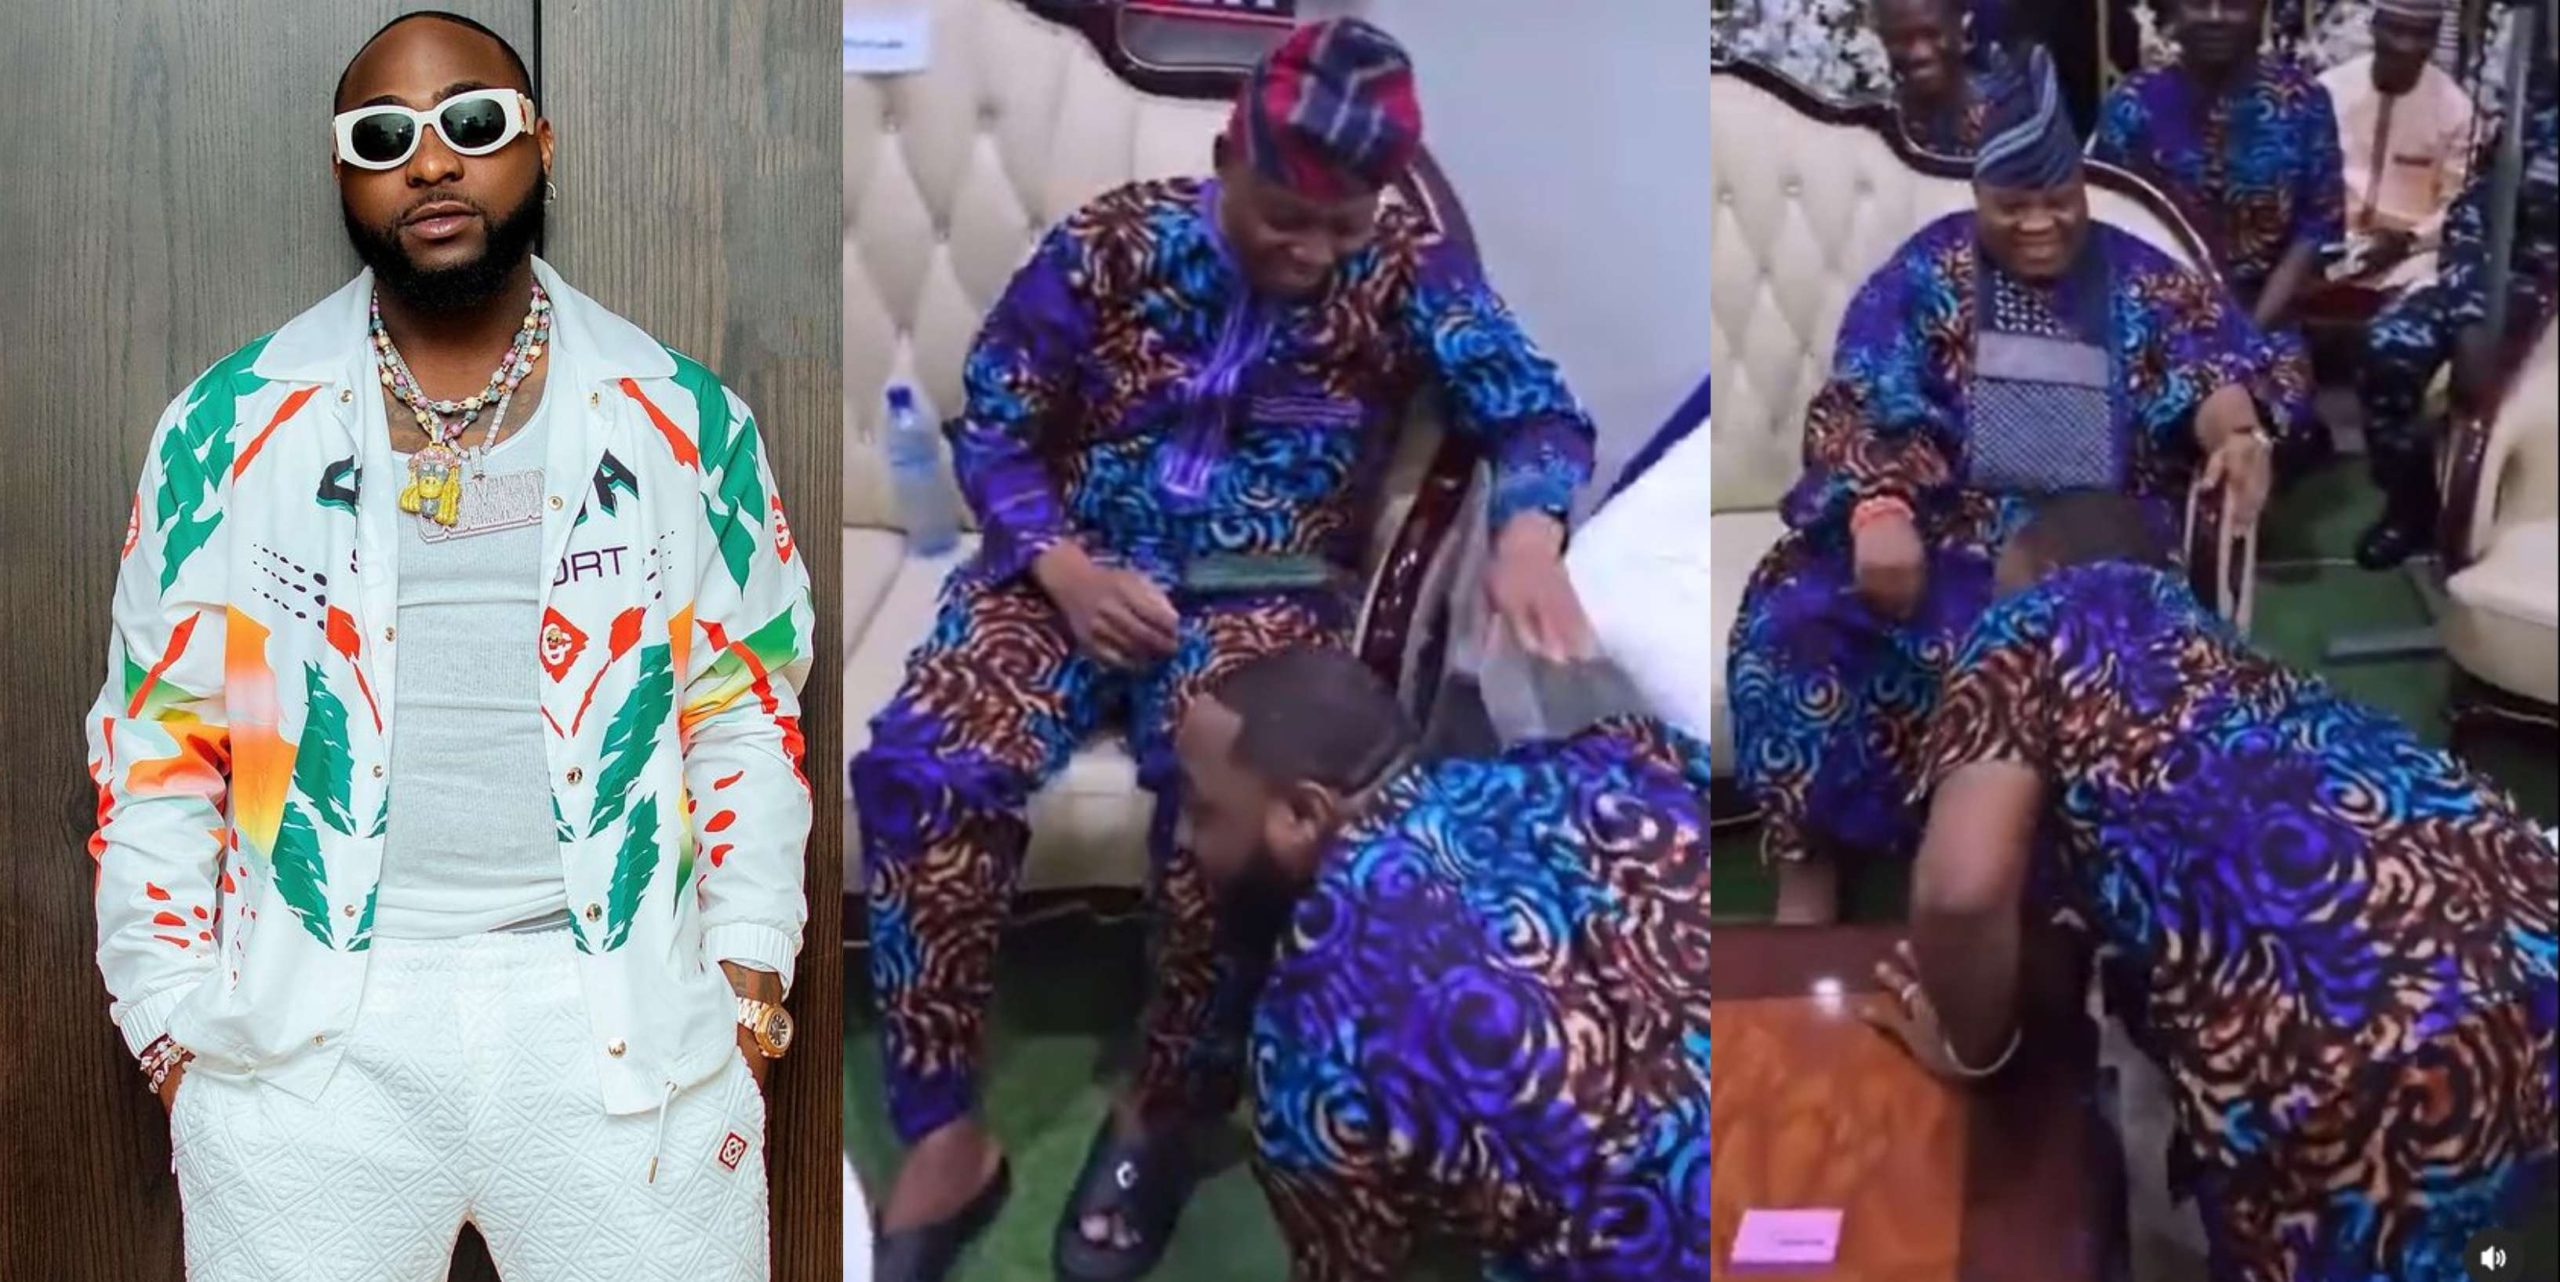 Moment singer Davido prostrates to greet his father, uncle and others at family event